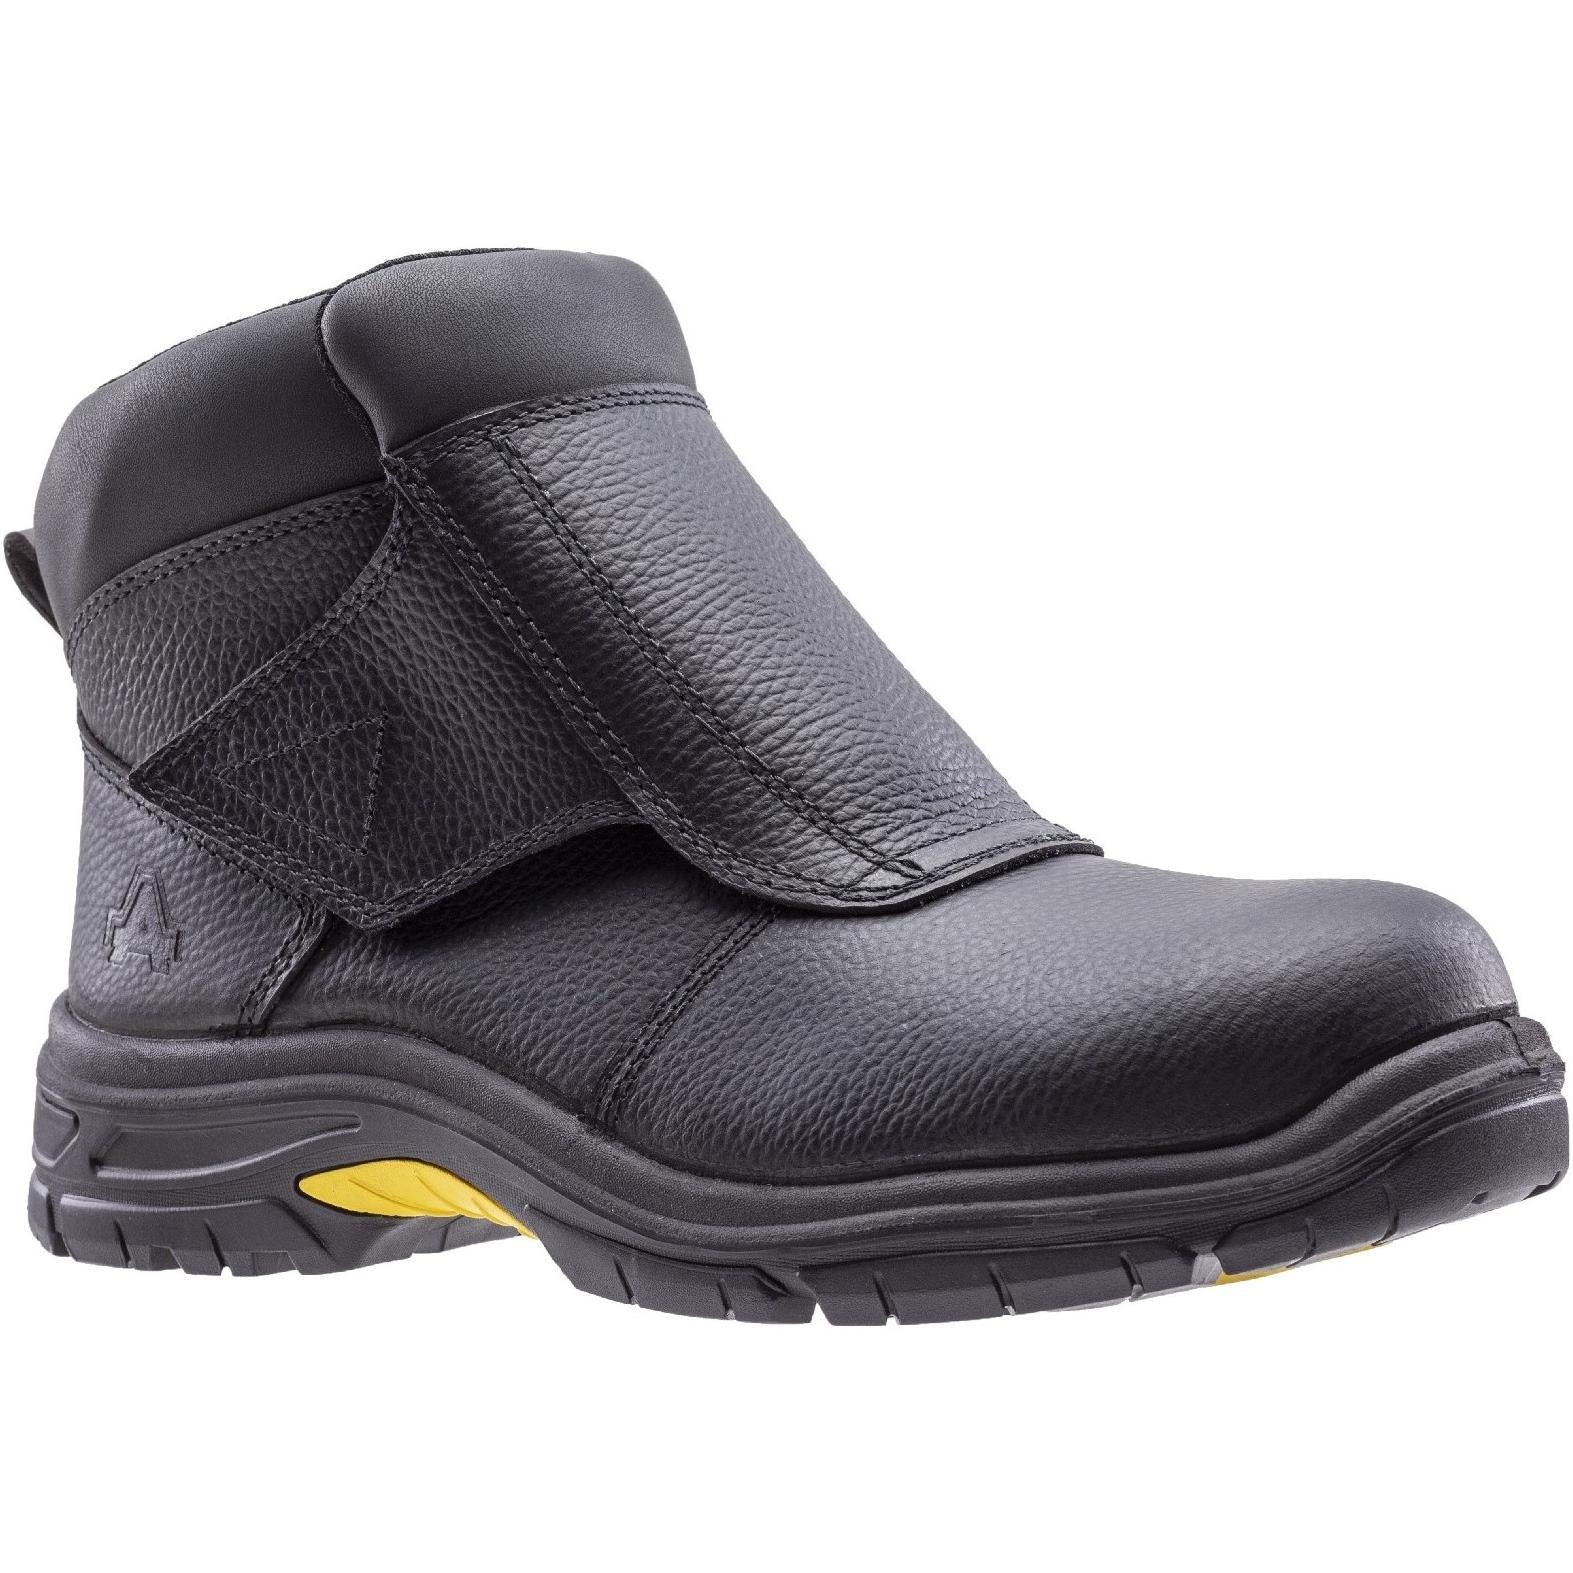 Amblers Safety AS950 Welding Safety Boot